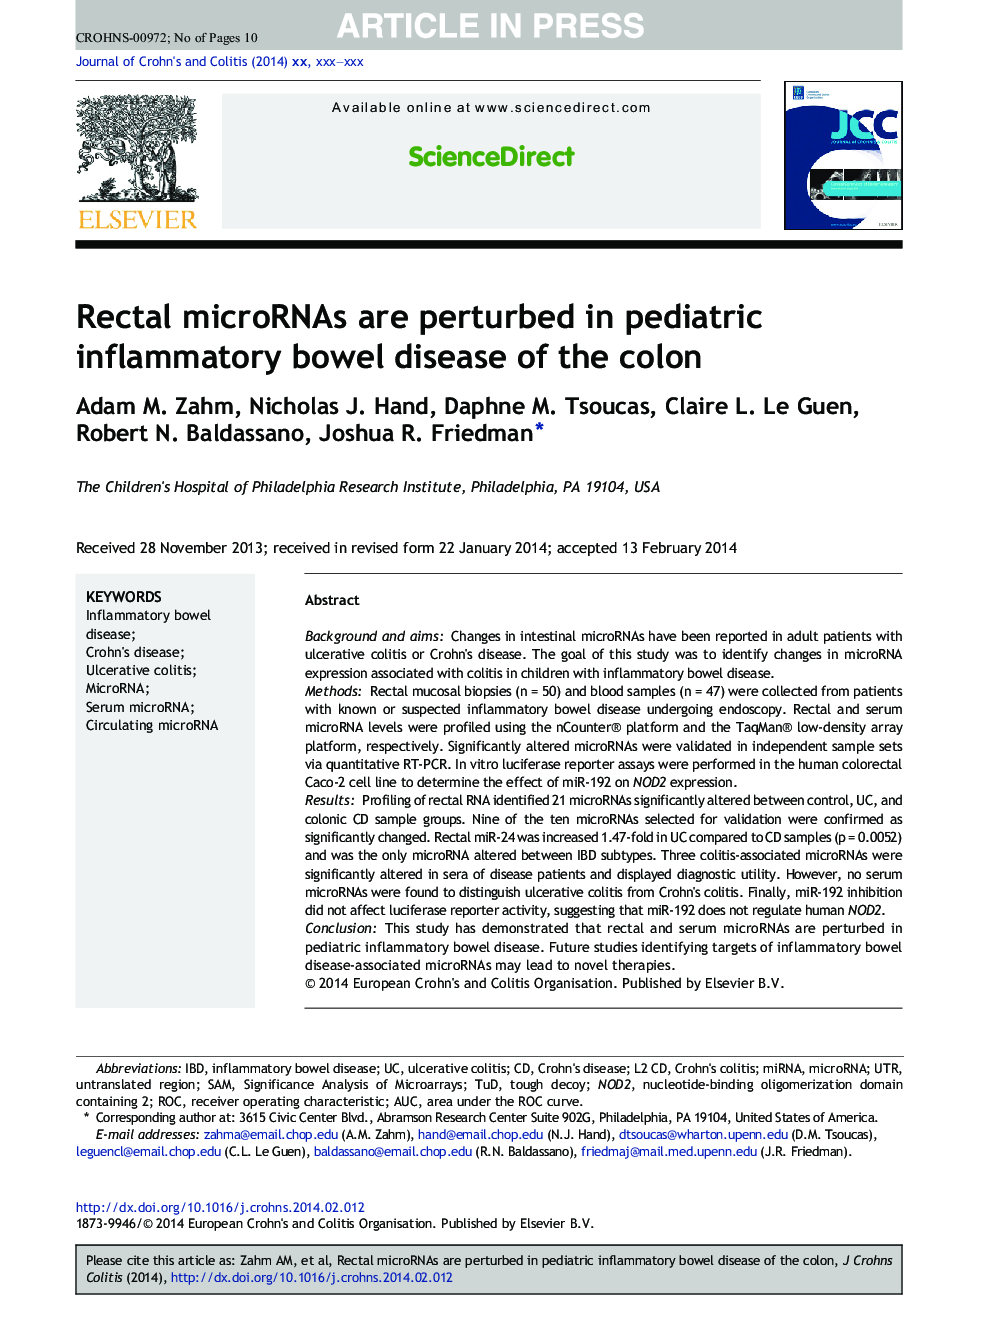 Rectal microRNAs are perturbed in pediatric inflammatory bowel disease of the colon